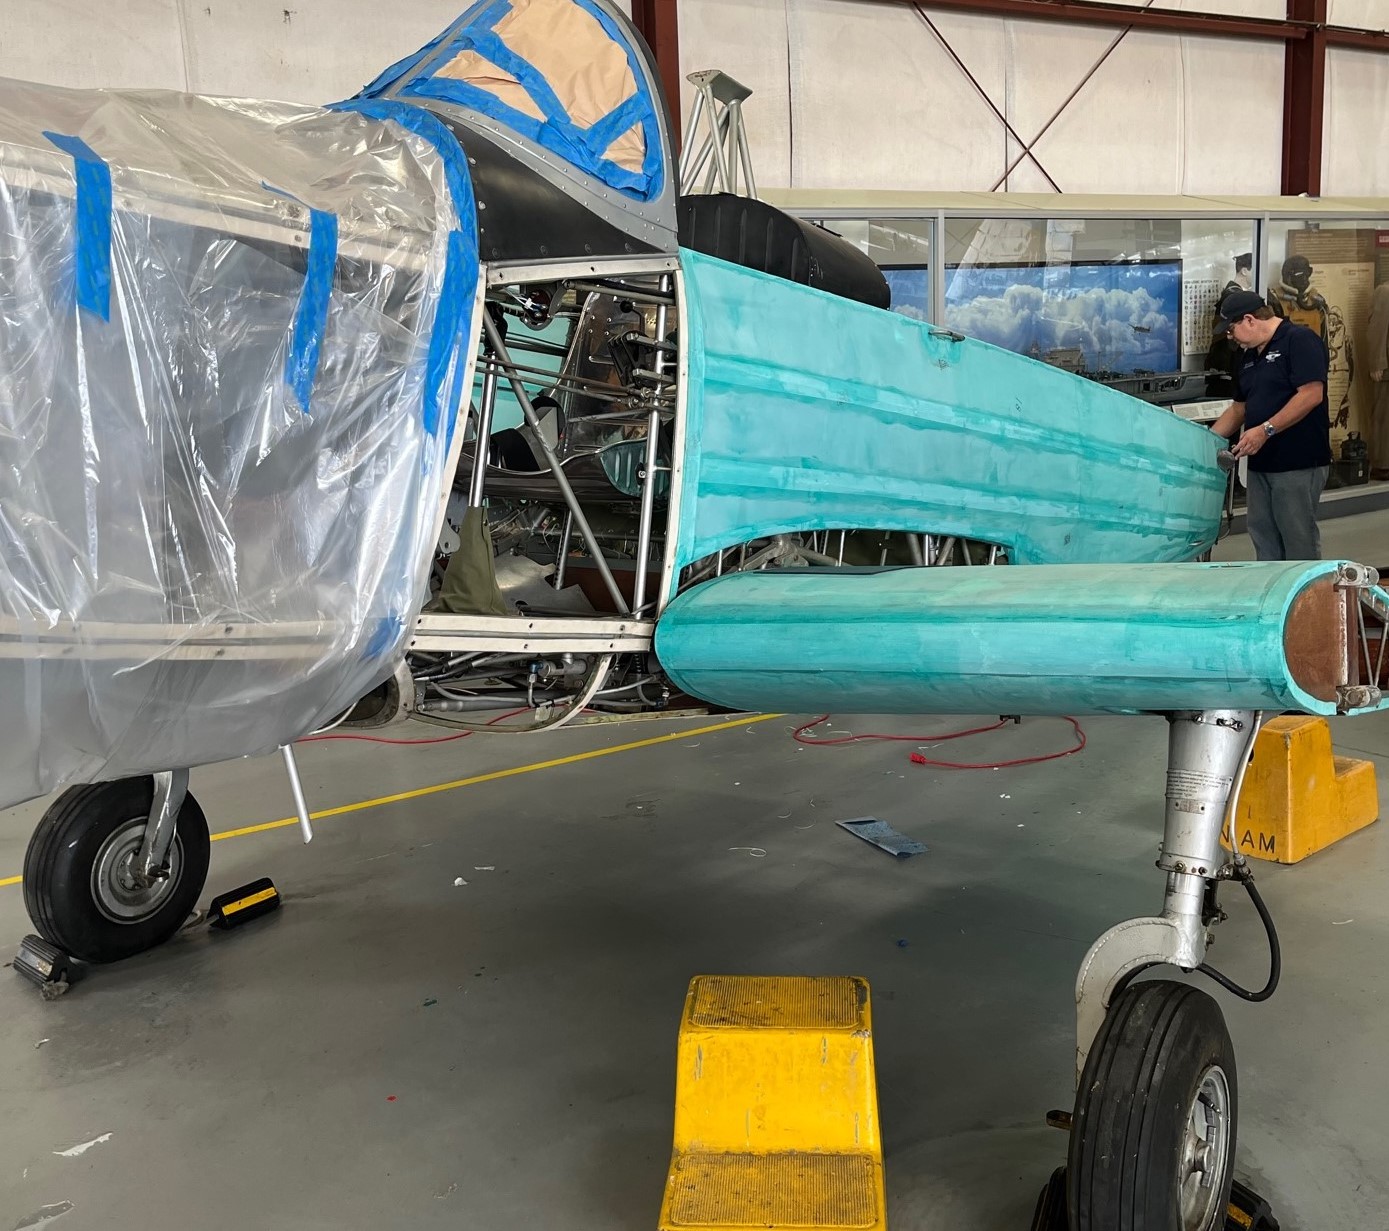 A PT-19 trainer is nearing completion at Commemorative Airbase Georgia in Peachtree City. The vintage aircraft, being restored for a second time, once served the Tuskegee Airmen during WWII at Moton Field in Tuskegee, Ala. It will receive a livery representing that time in its flying history, and return to offering flights to anyone interested in purchasing a ride at Airbase Georgia. (Photo courtesy of CAF Airbase Georgia)